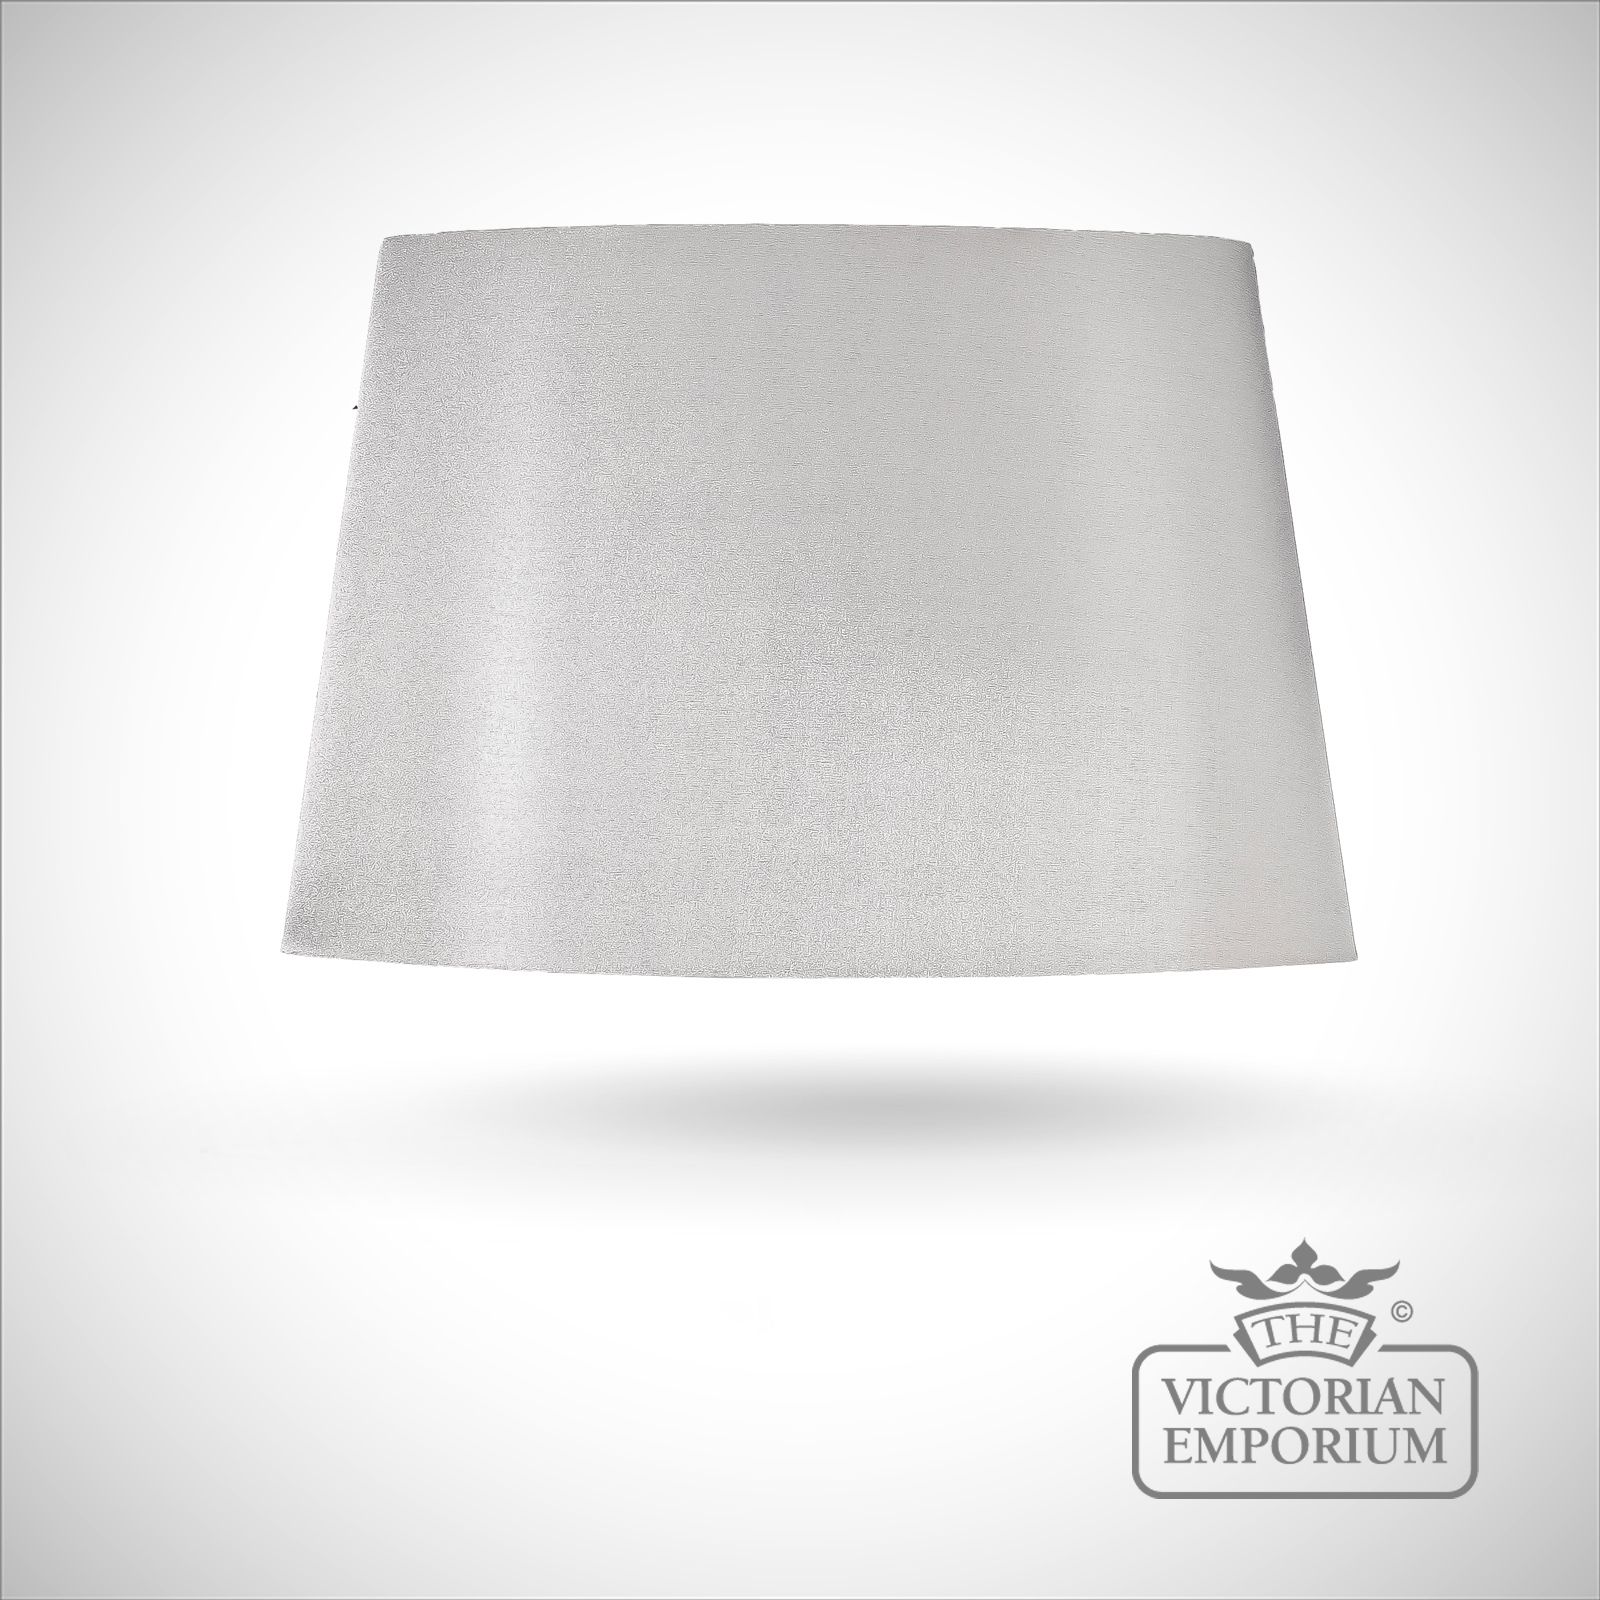 Tapered Oval Lamp Shade in Silver with Silver Lining - 53cm